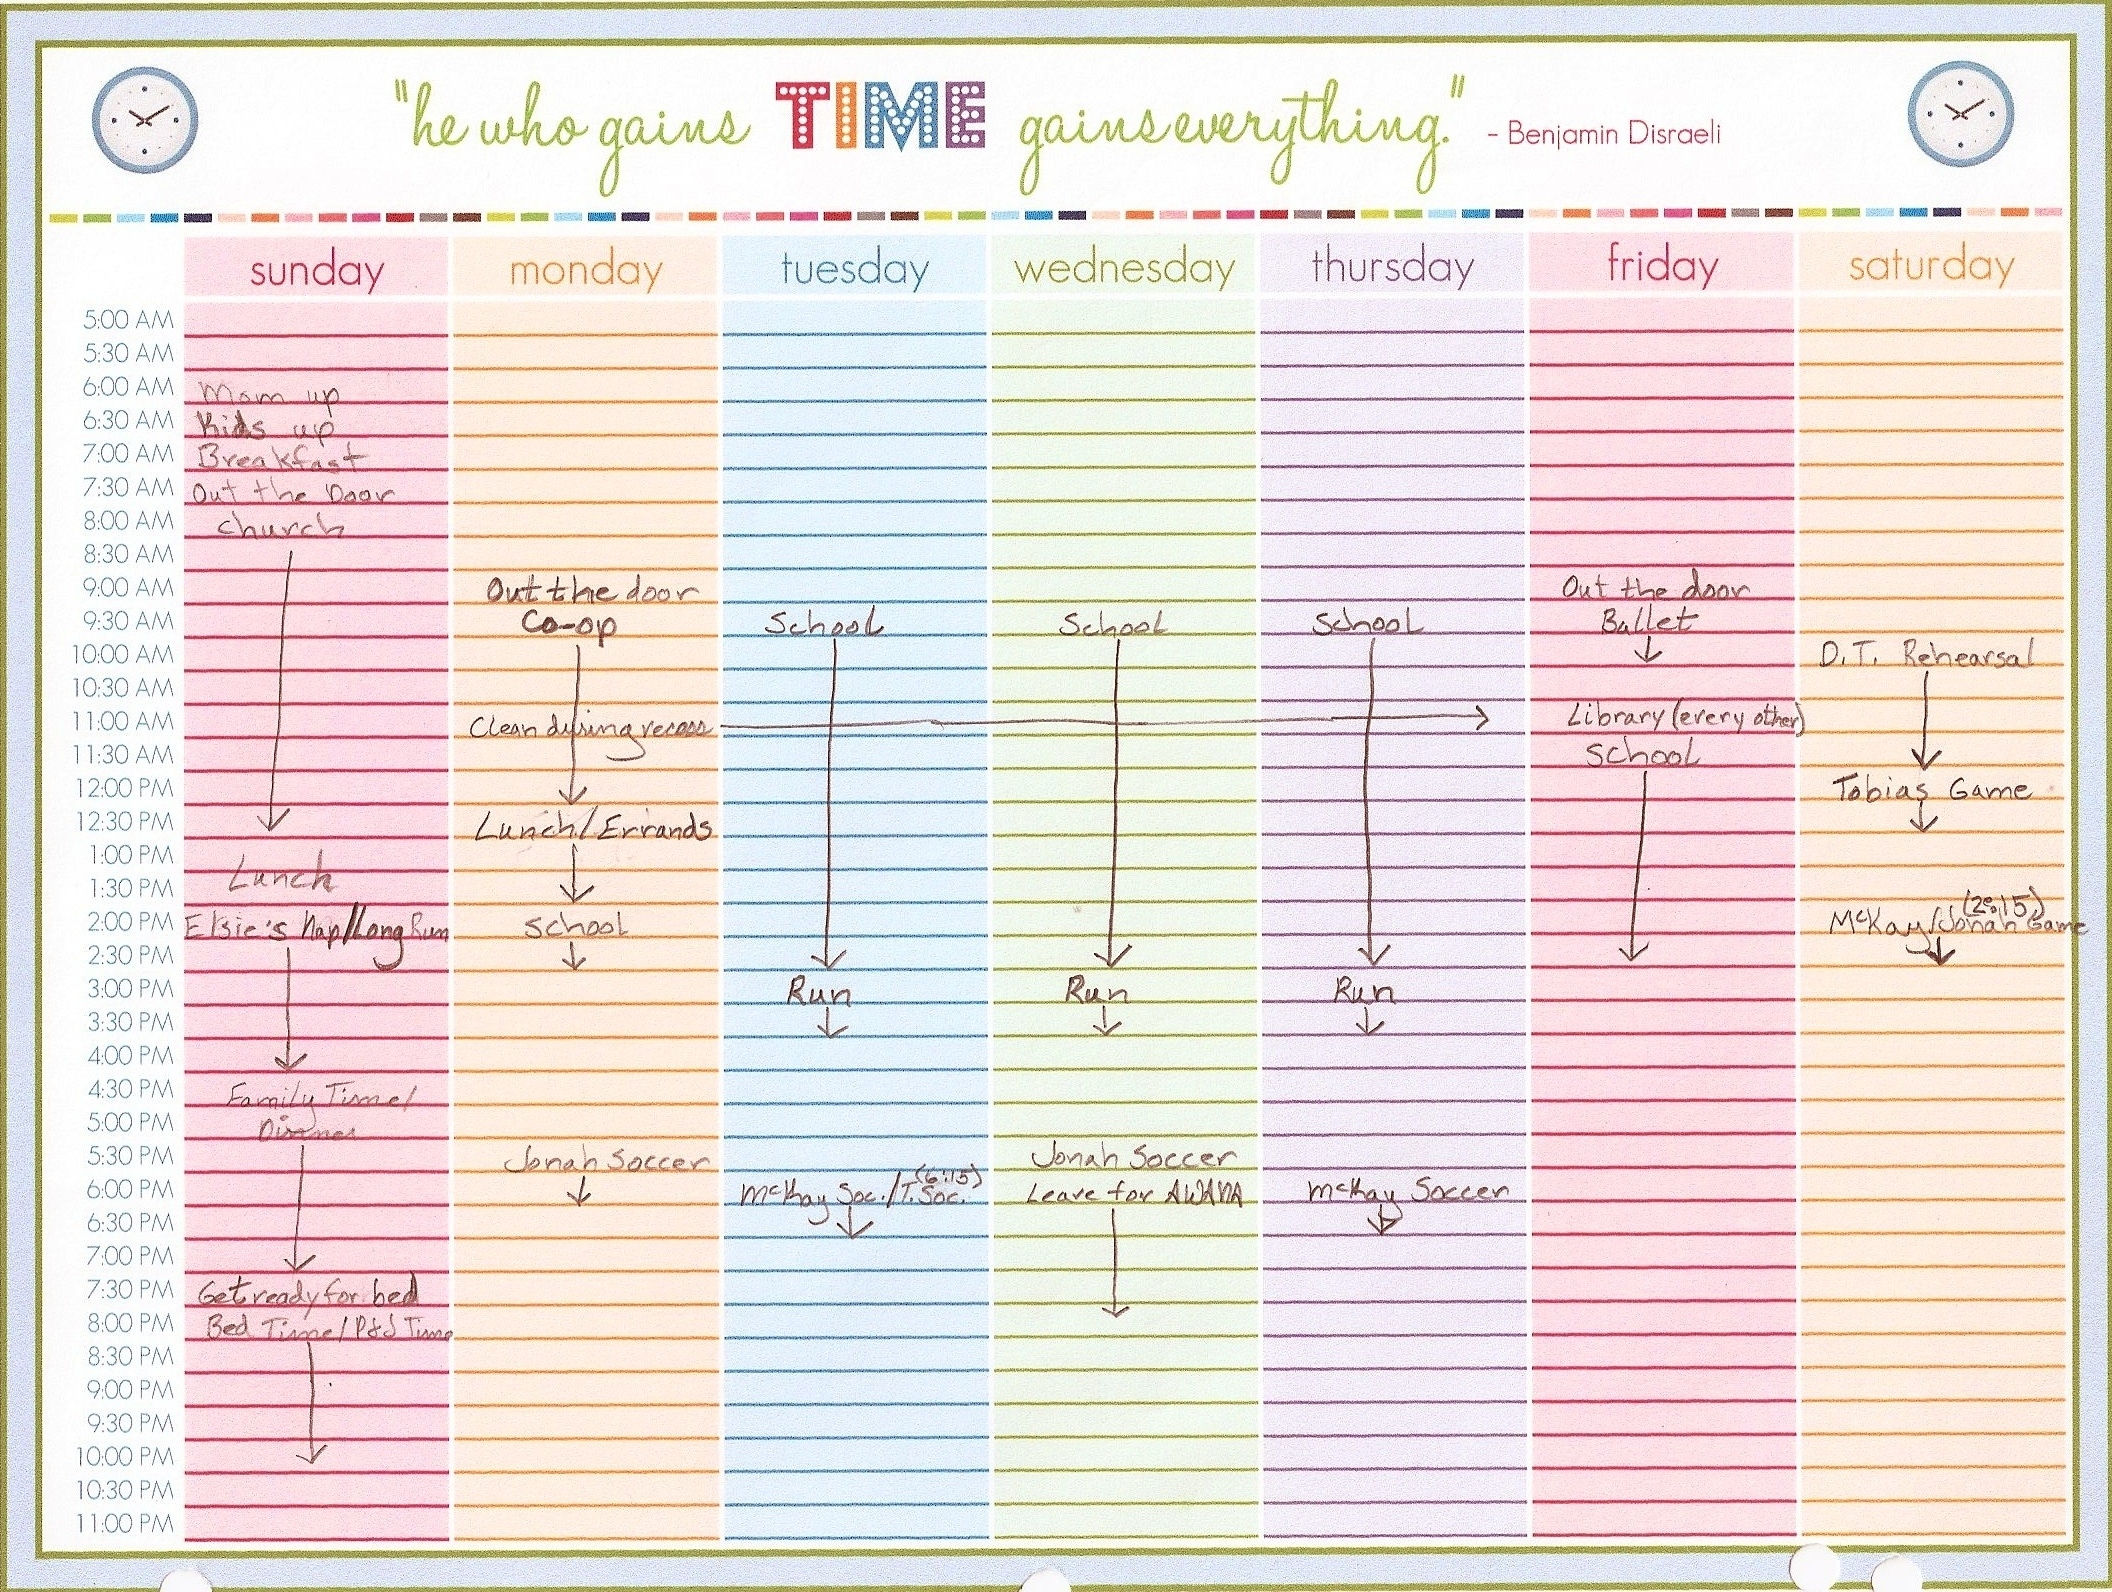 Printable Monthly Calendar With Time Slots  Calendar Inspiration Design with regard to Printable Monthly Calendar With Time Slots